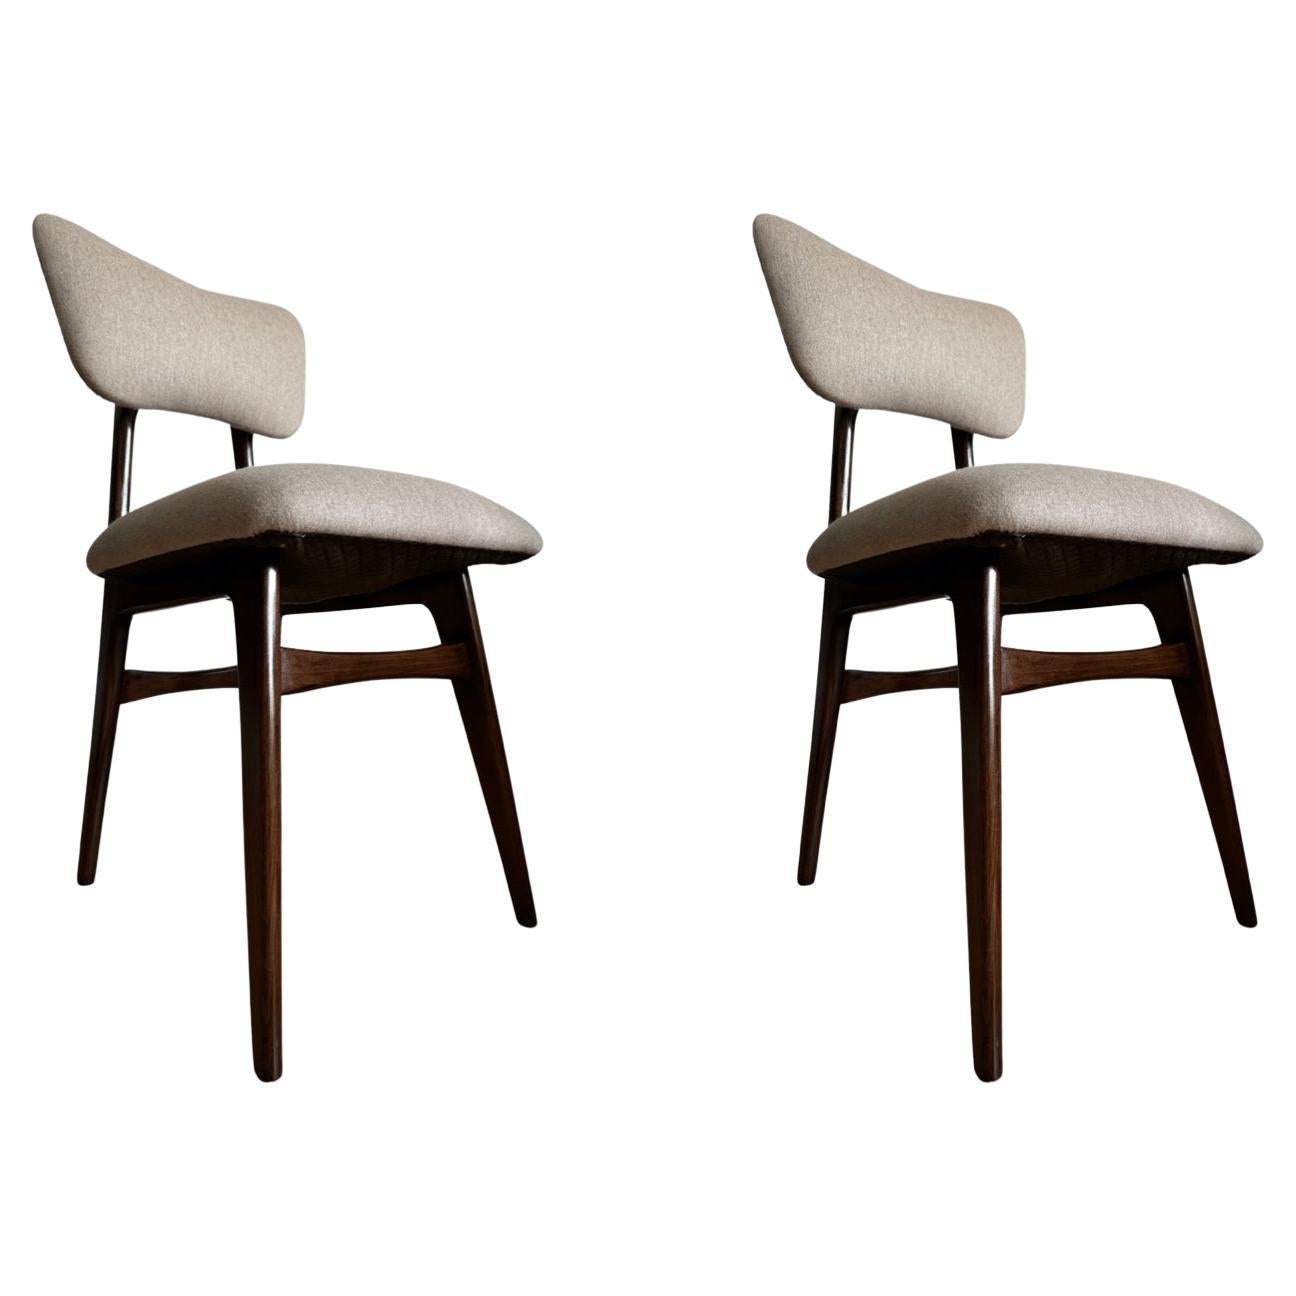 Set of Two Midcentury Dining Chairs in Beige Wool Upholstery, Poland, 1960s For Sale